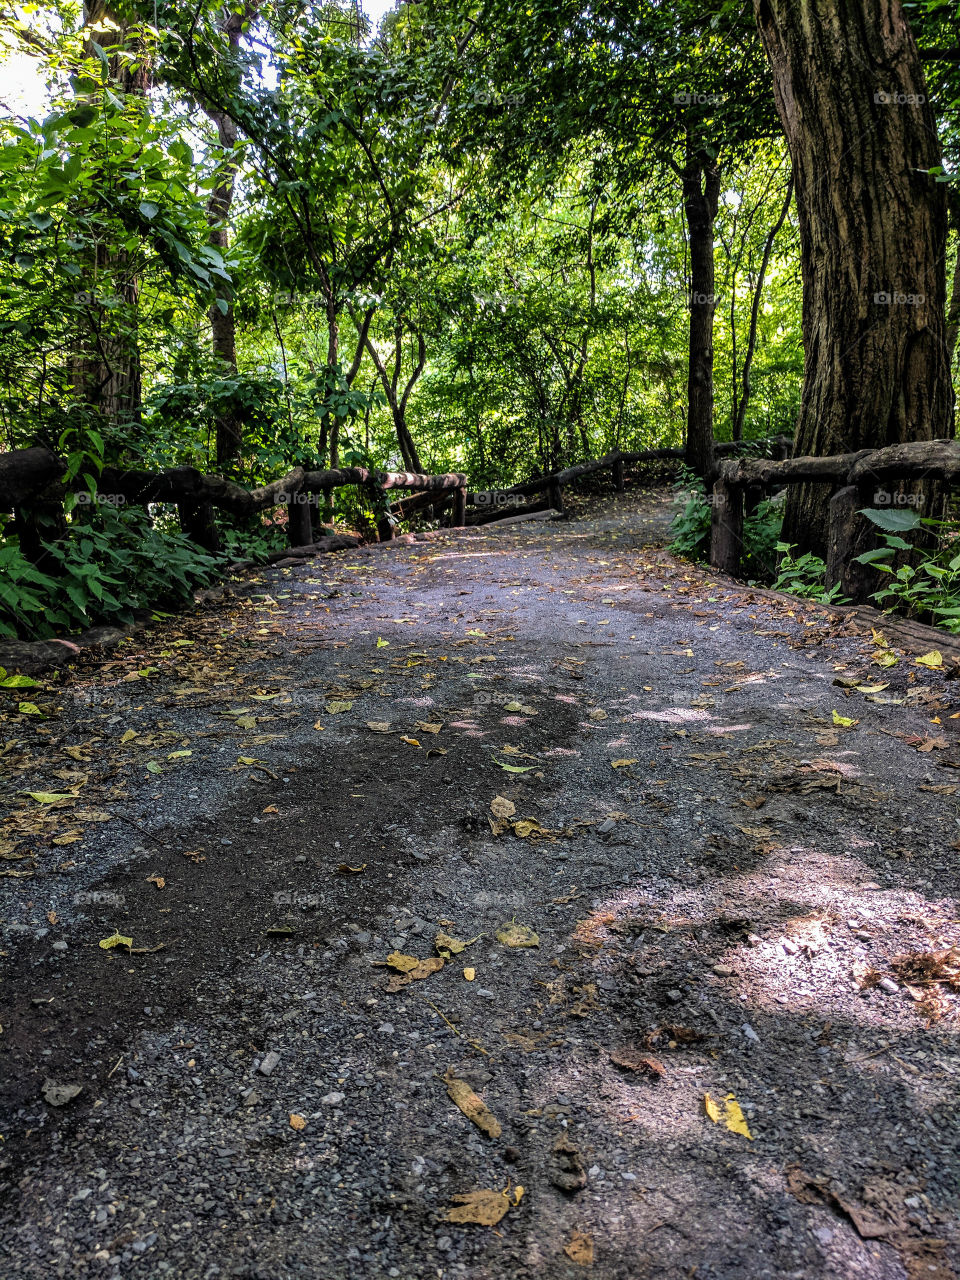 Secluded and empty pathway through Central Park.